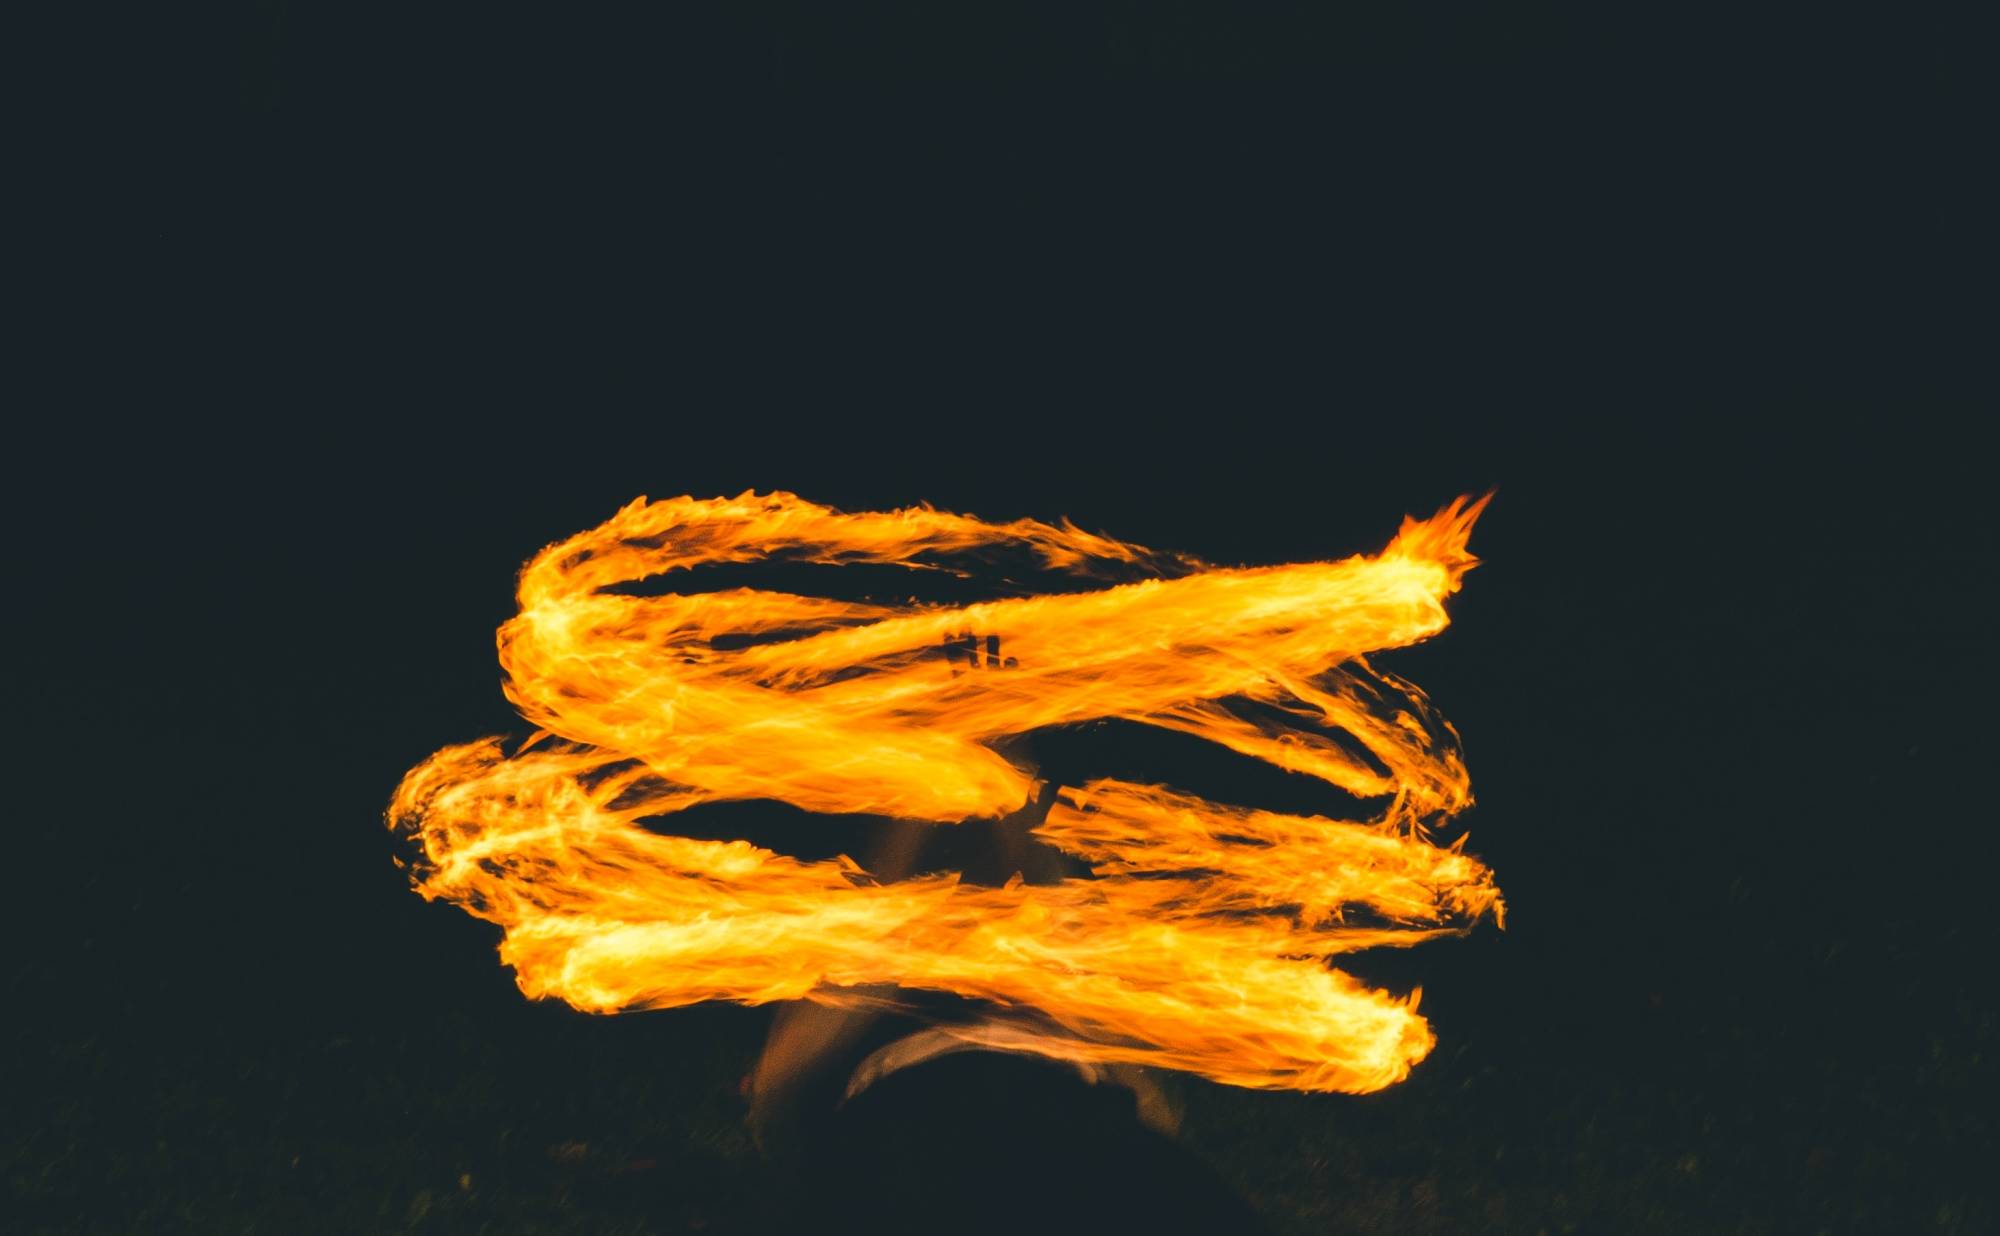 A artistic, flowing yellow, gold flame against a deep black background.